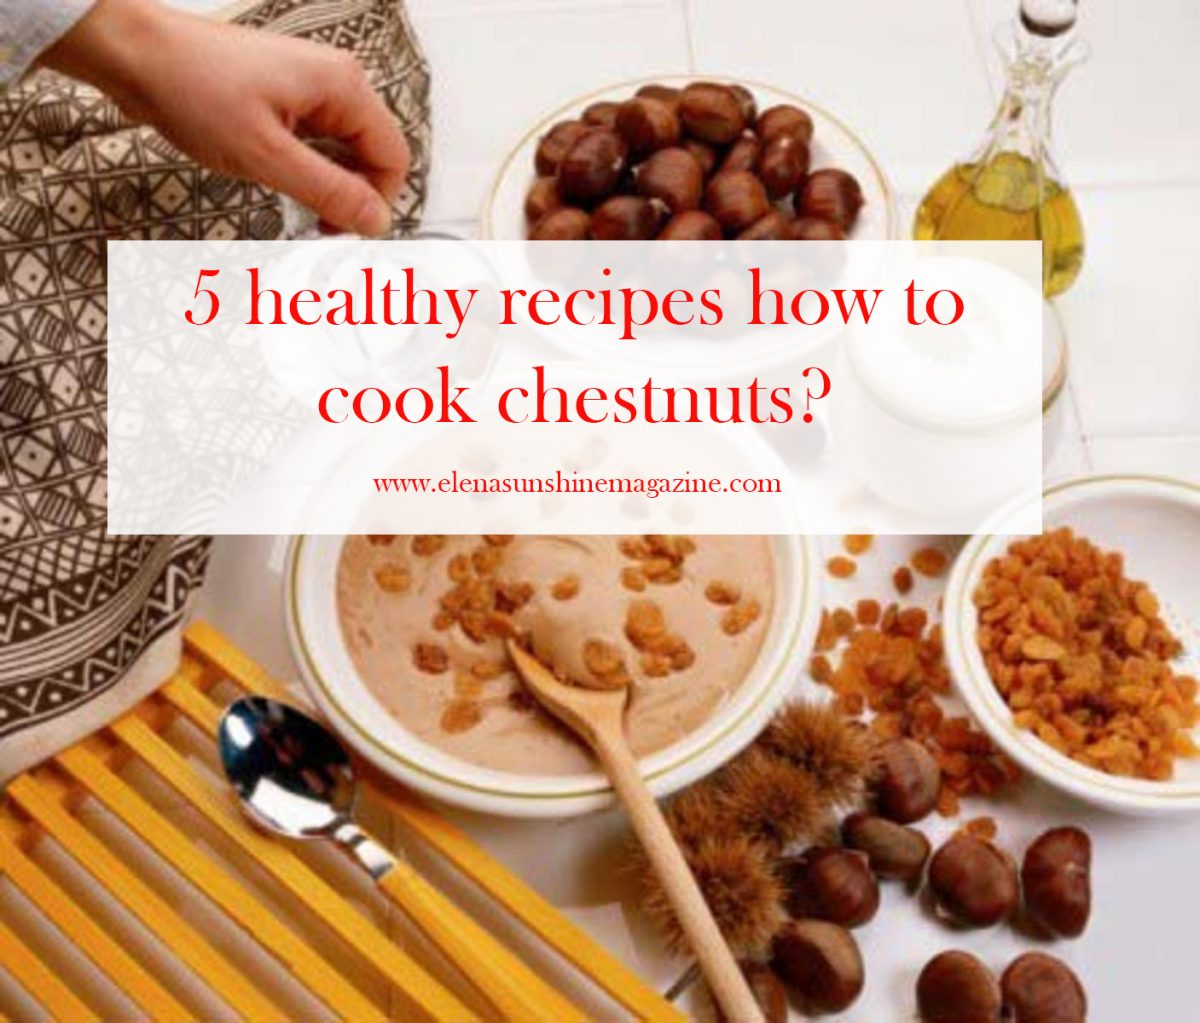 5 healthy recipes how to cook chestnuts?